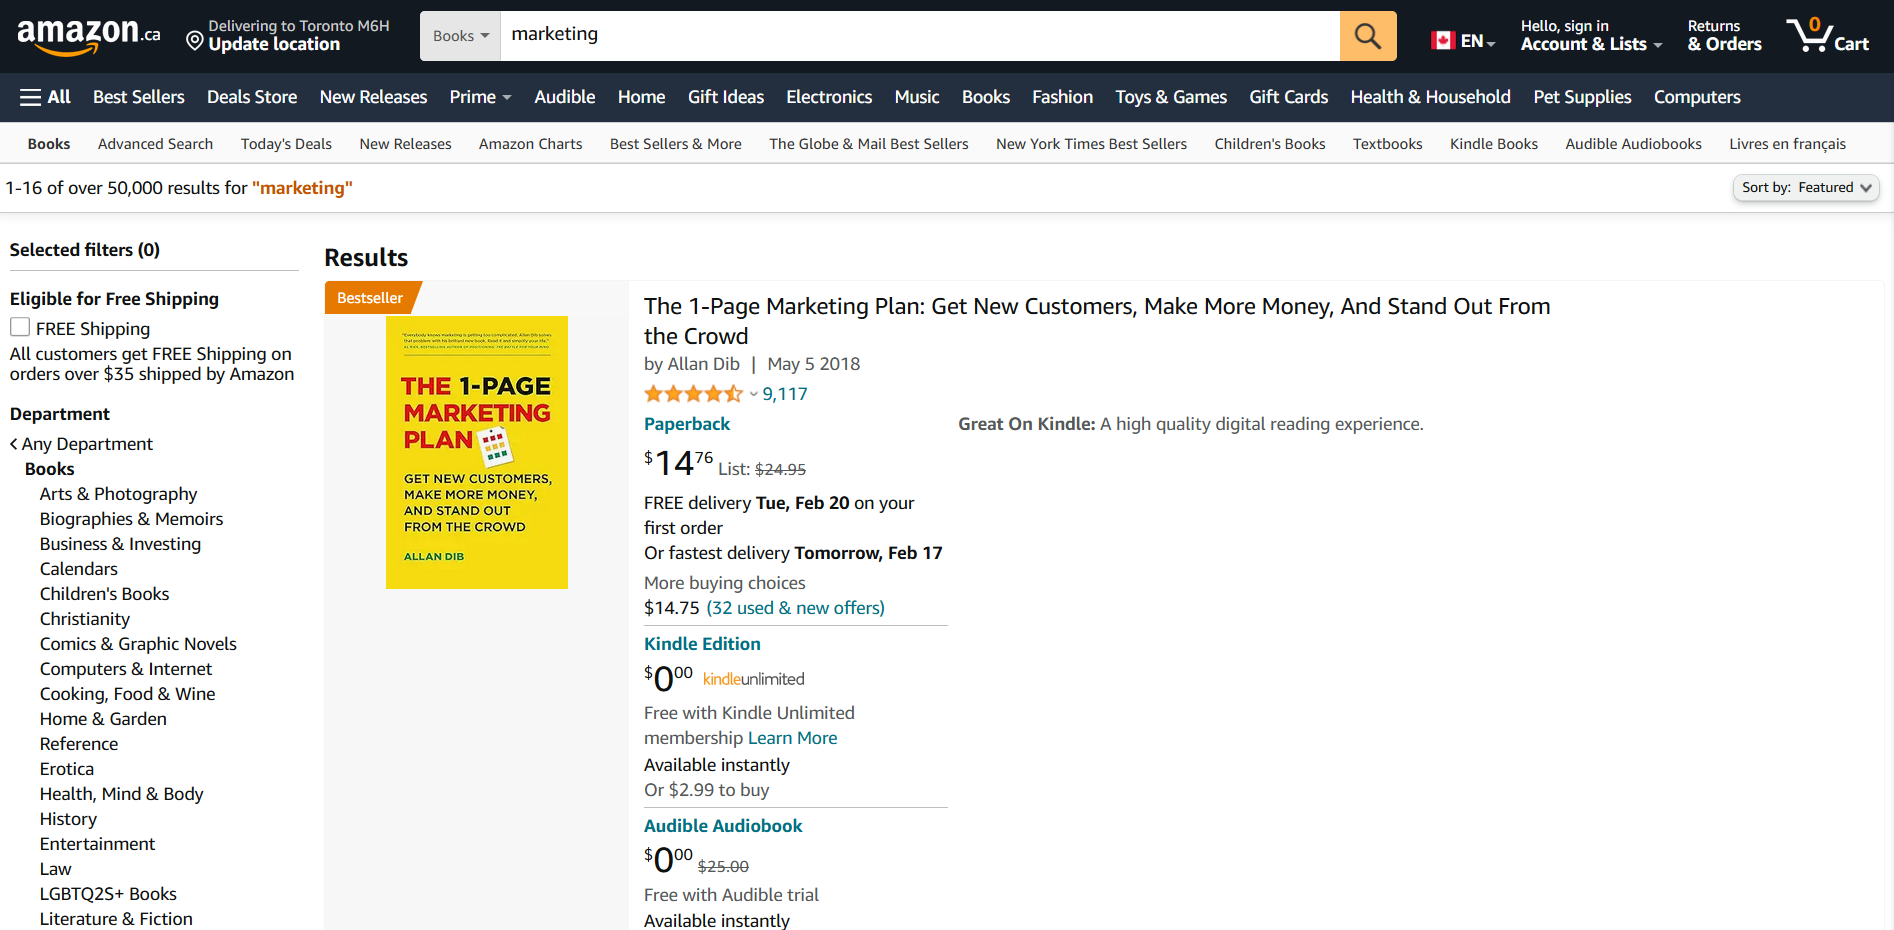 image-2-amazon-marketing-results-page